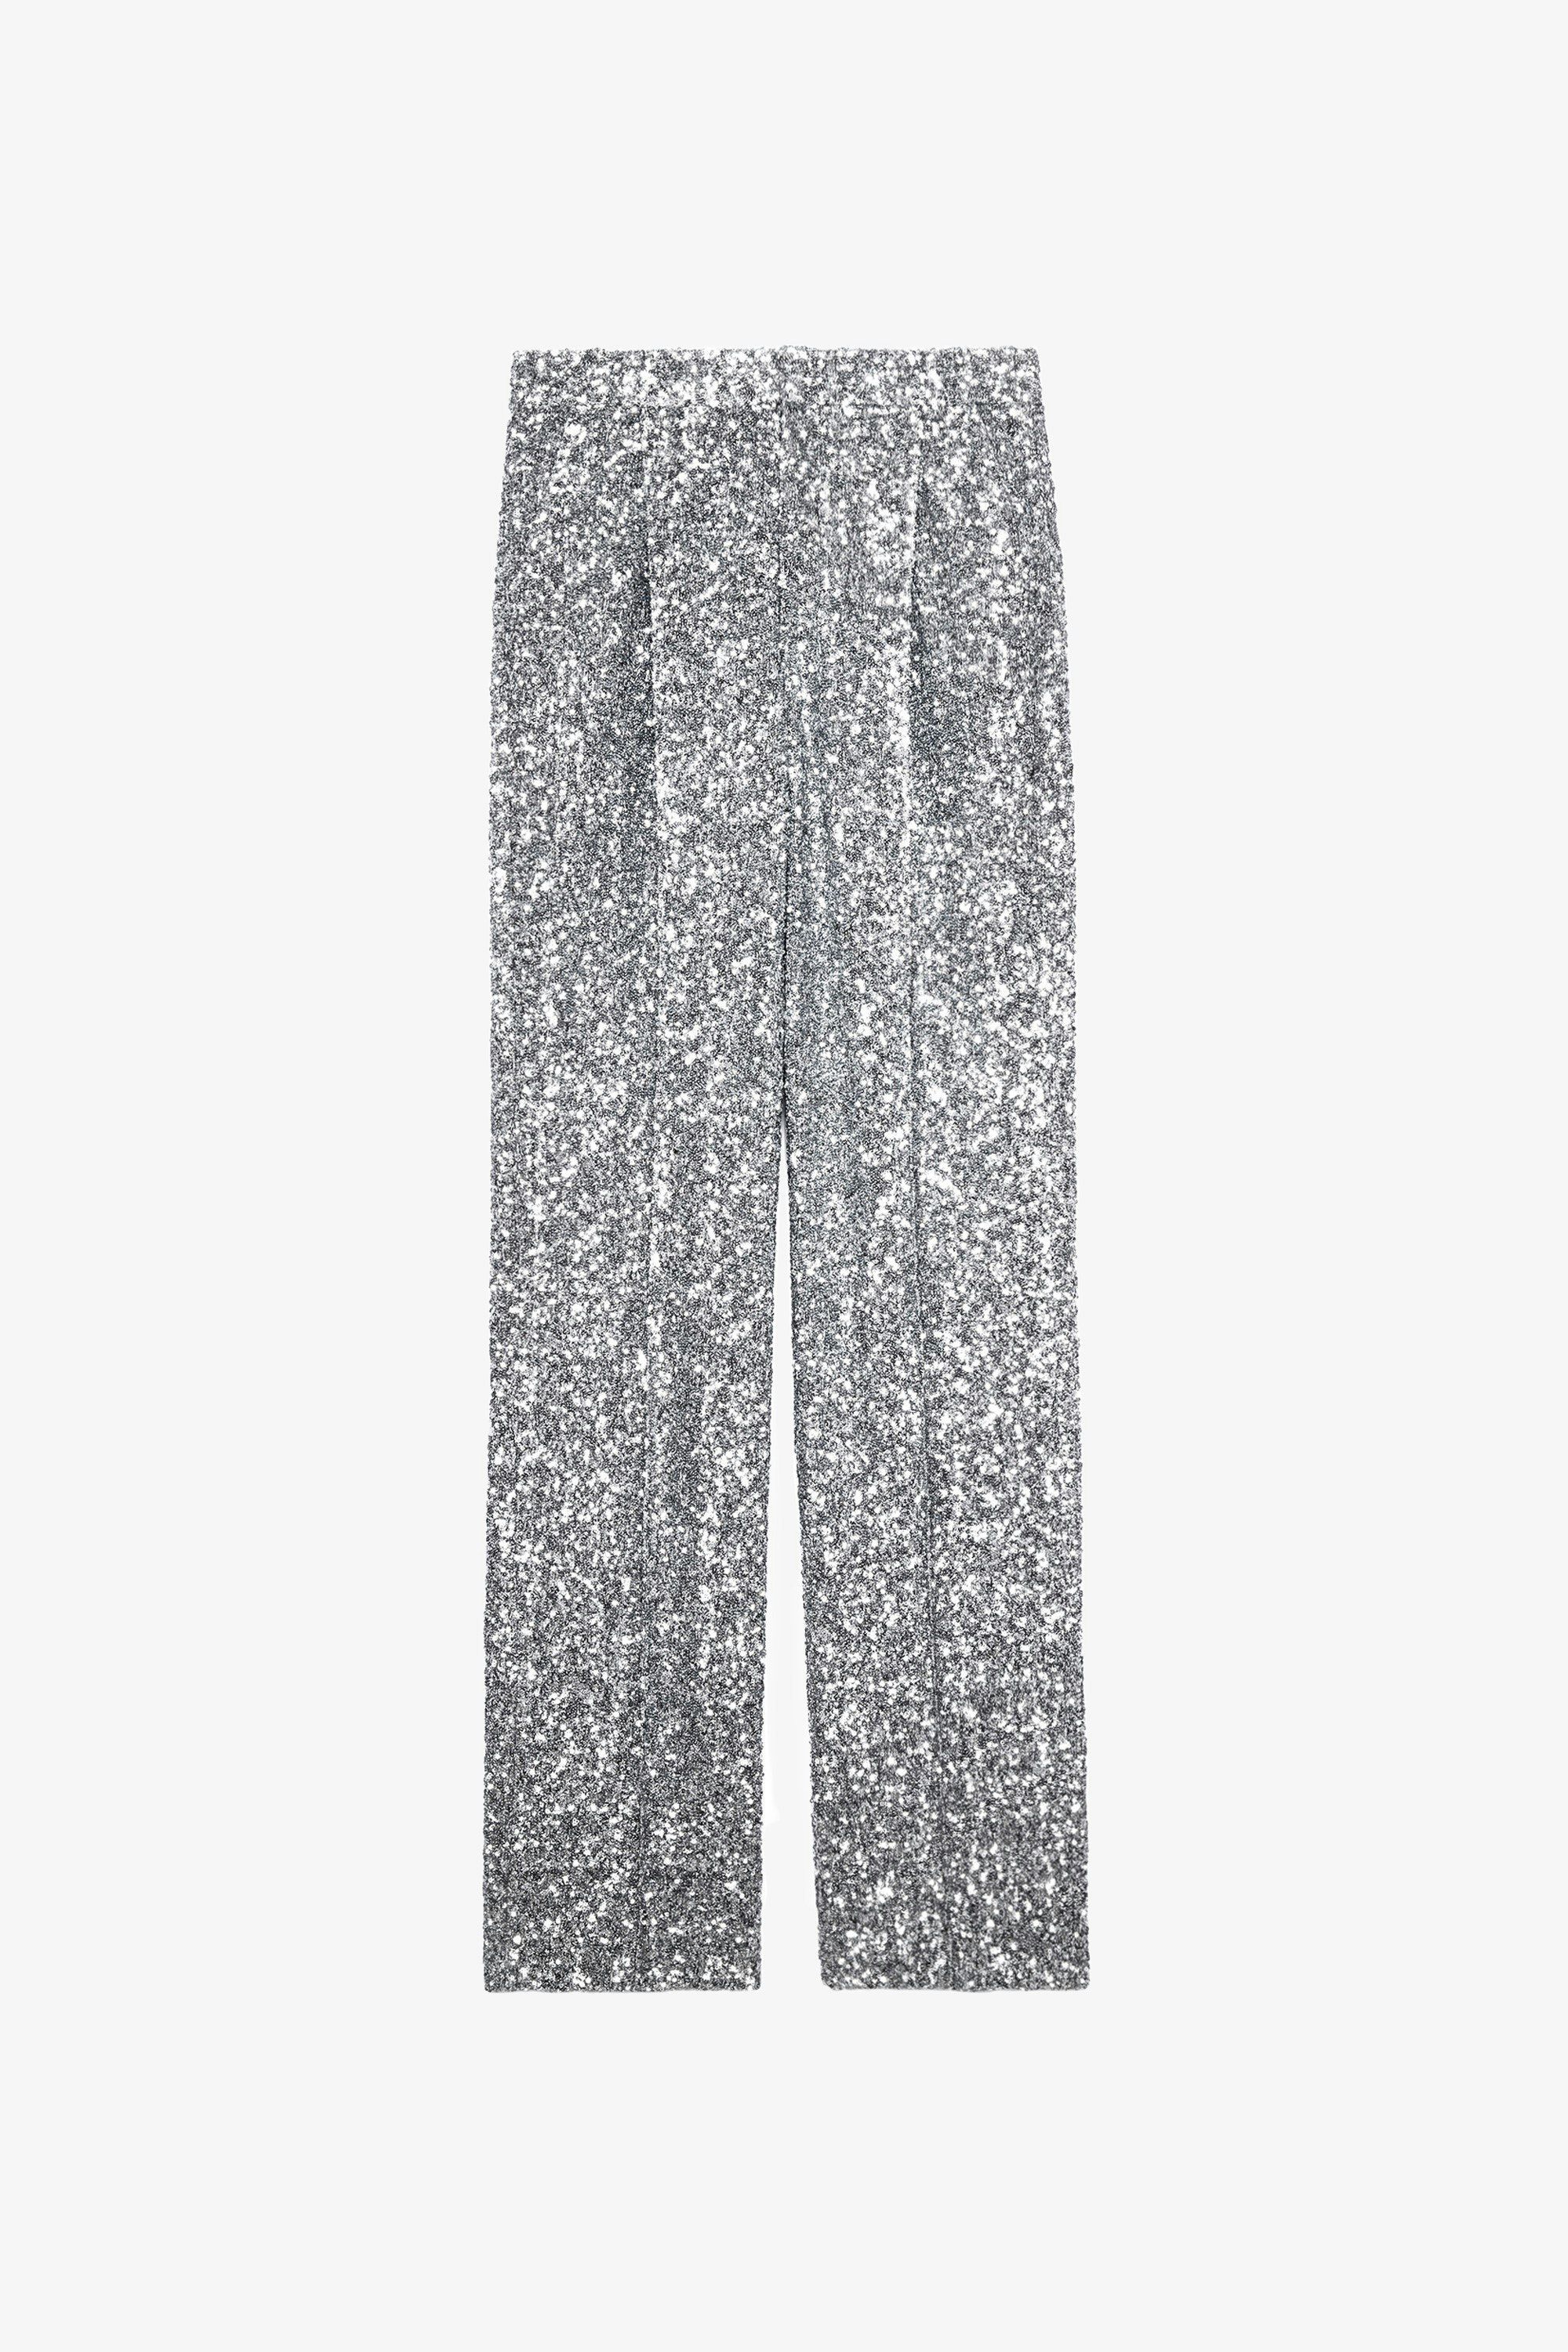 Gitane Sequins Trousers Women's grey sequinned suit trousers.